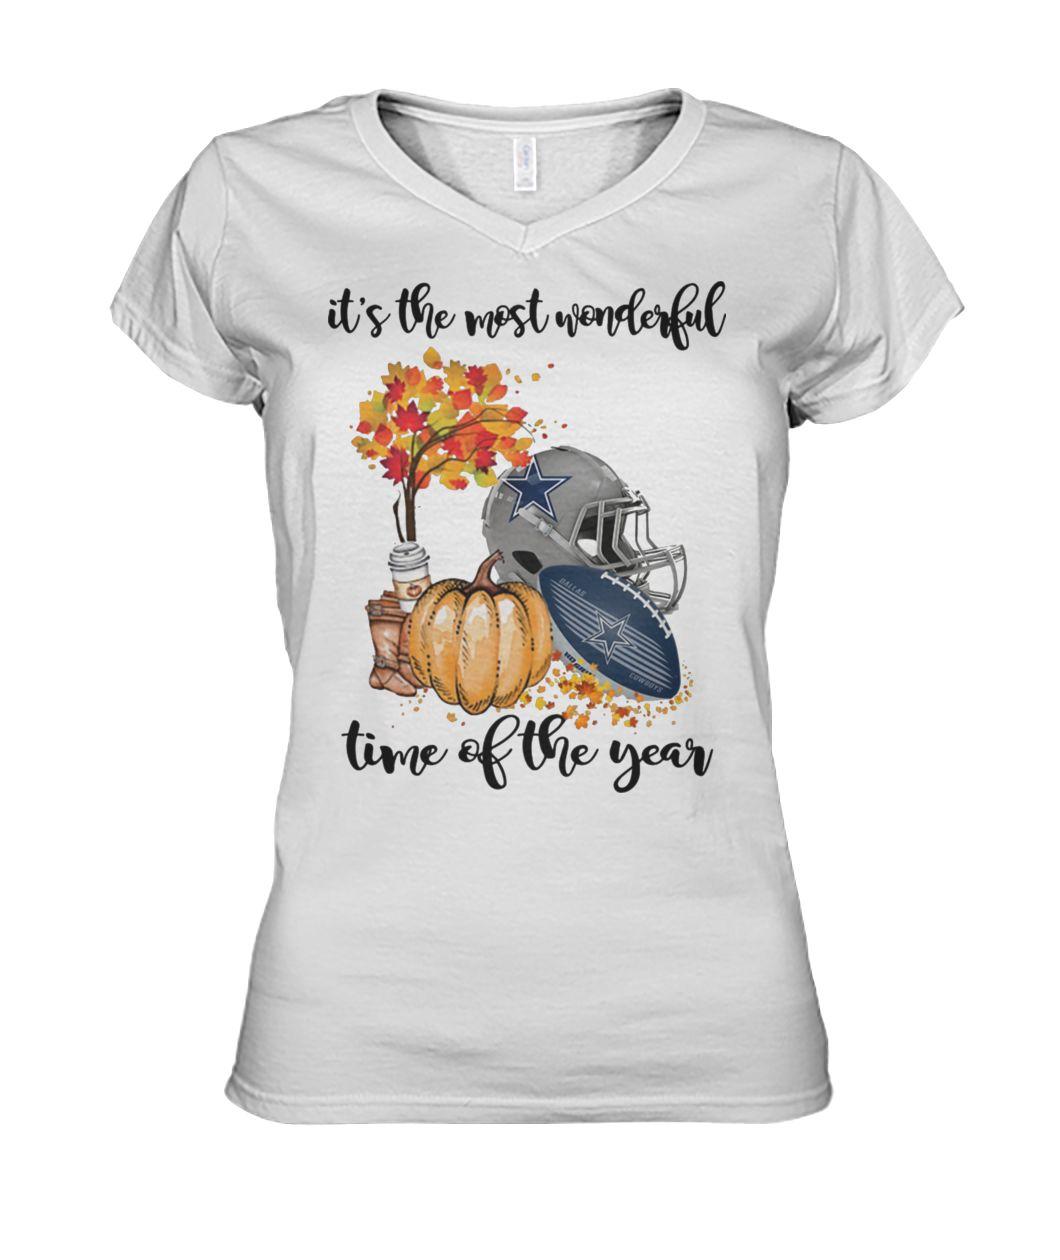 It’s the most wonderful time of the year dallas cowboys women's v-neck